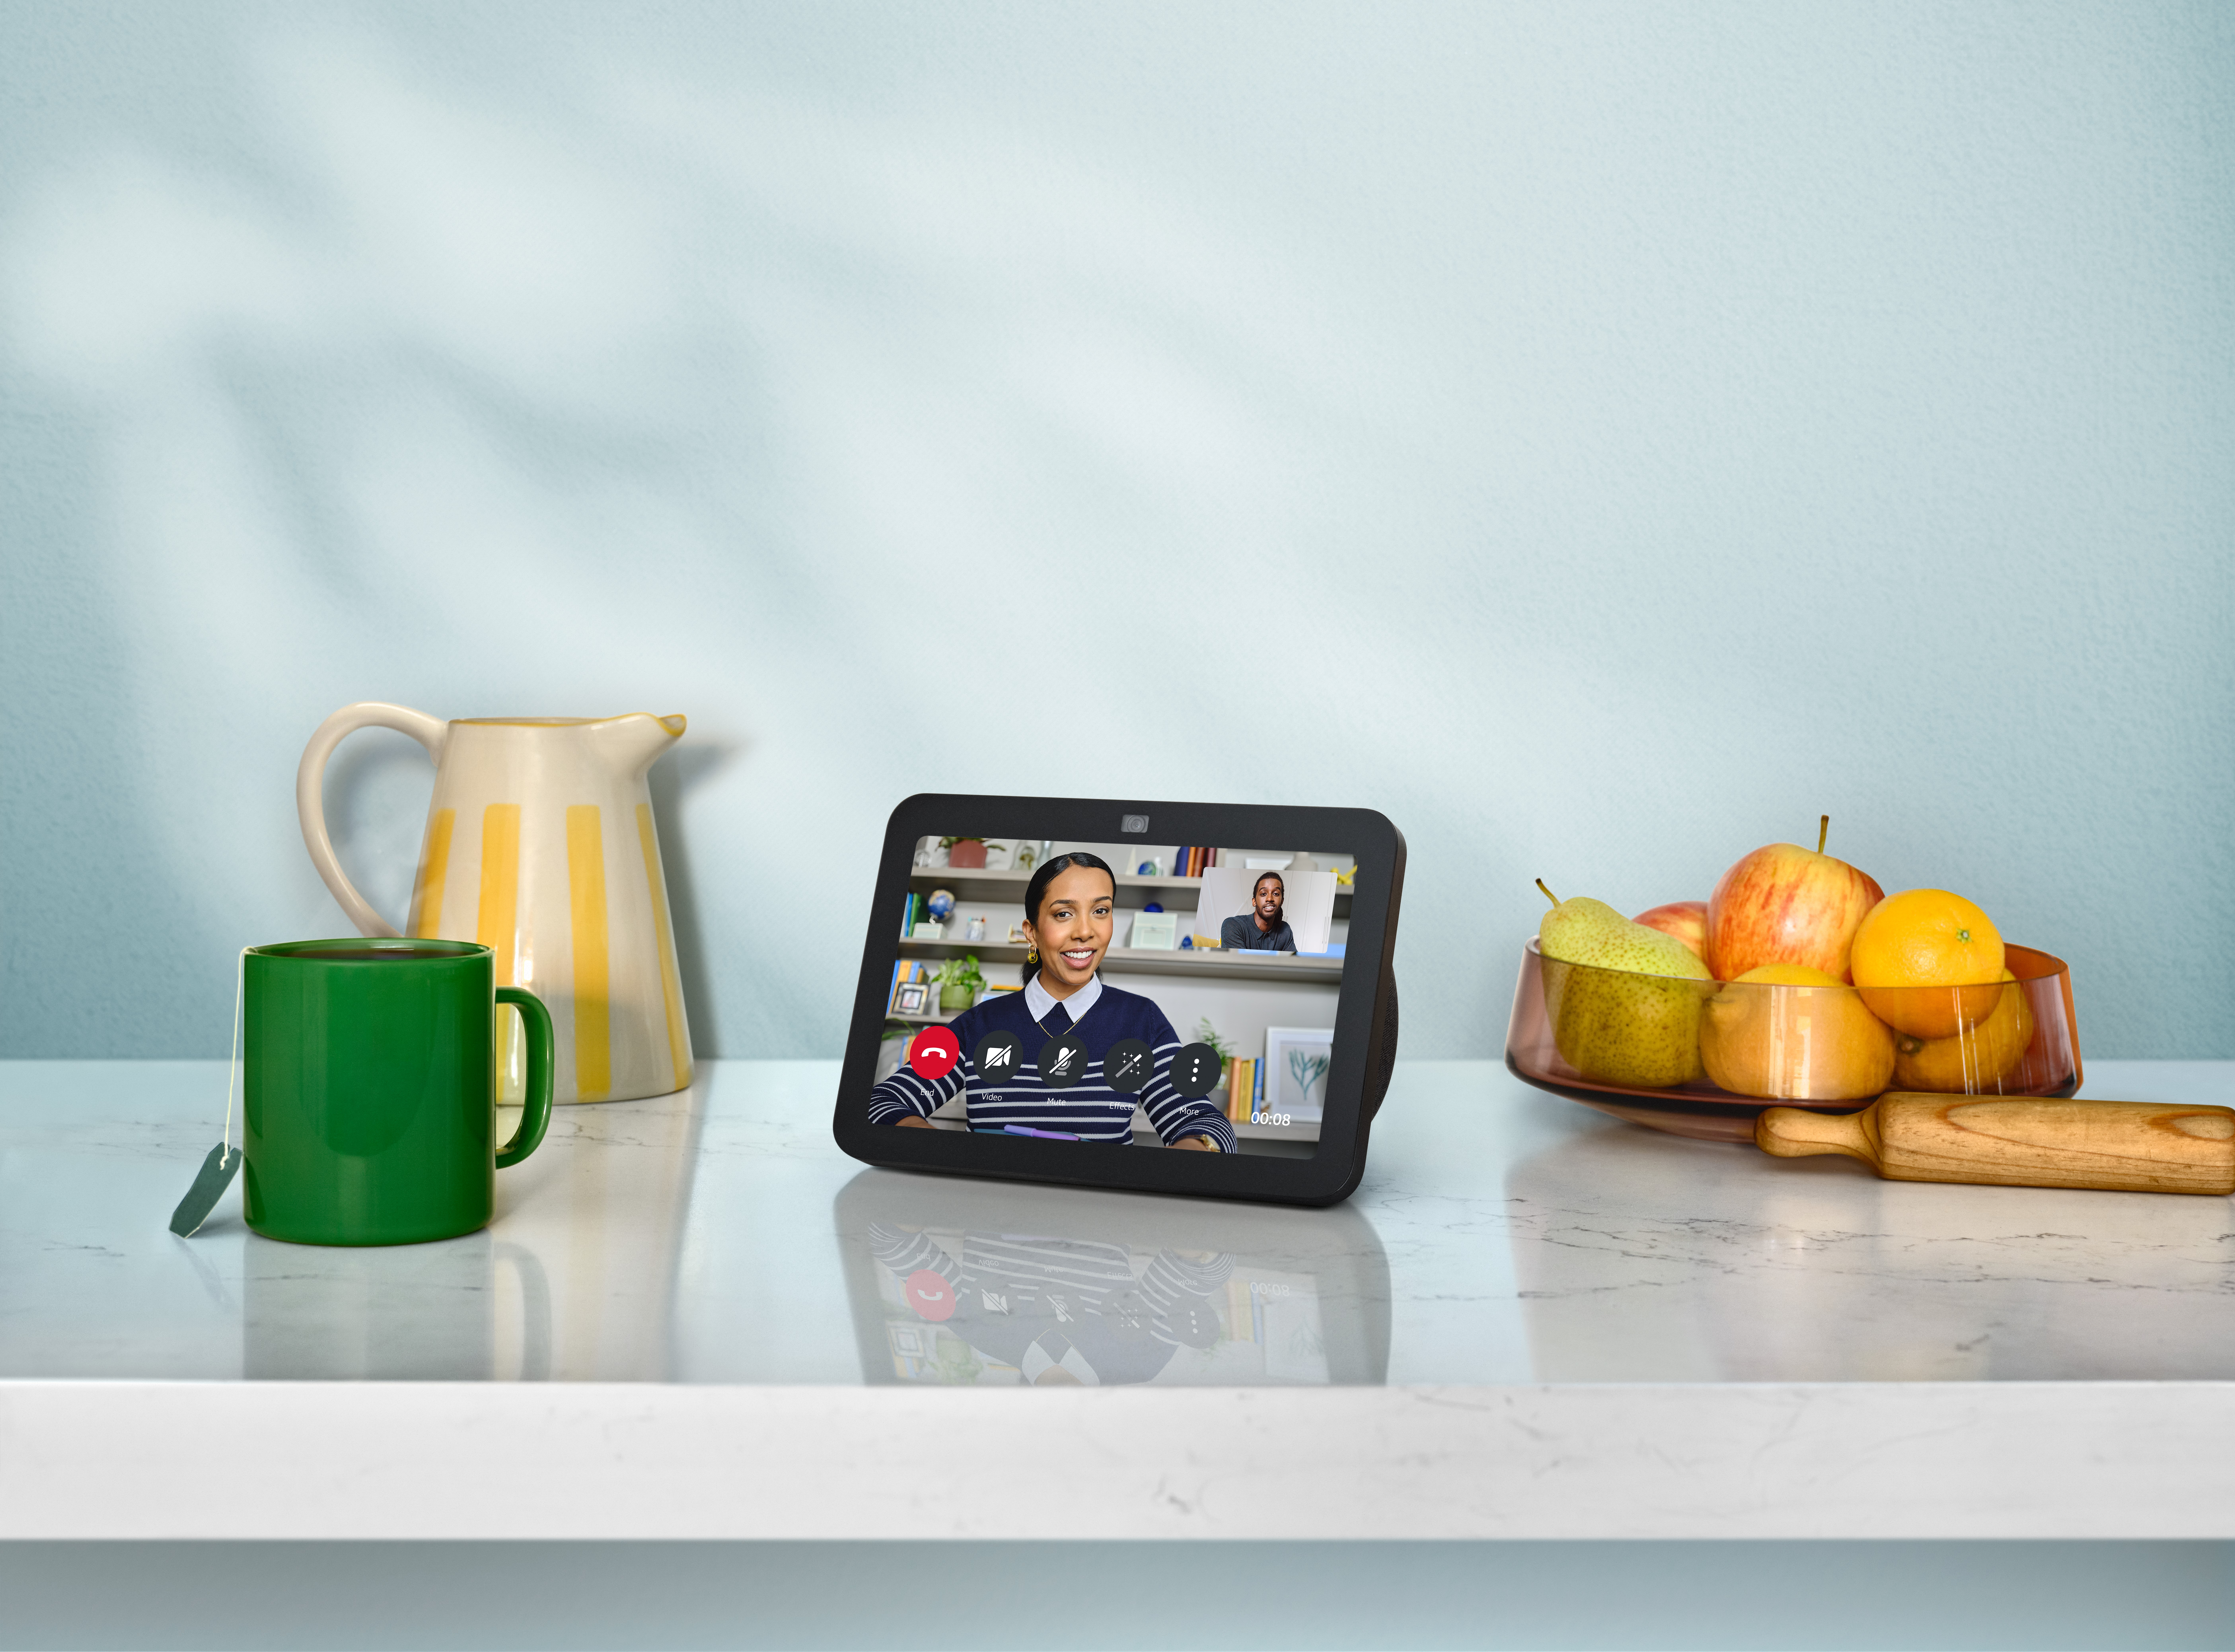 Amazon announced the Echo Show 8 yesterday. Starting at $150, it will ship in October.